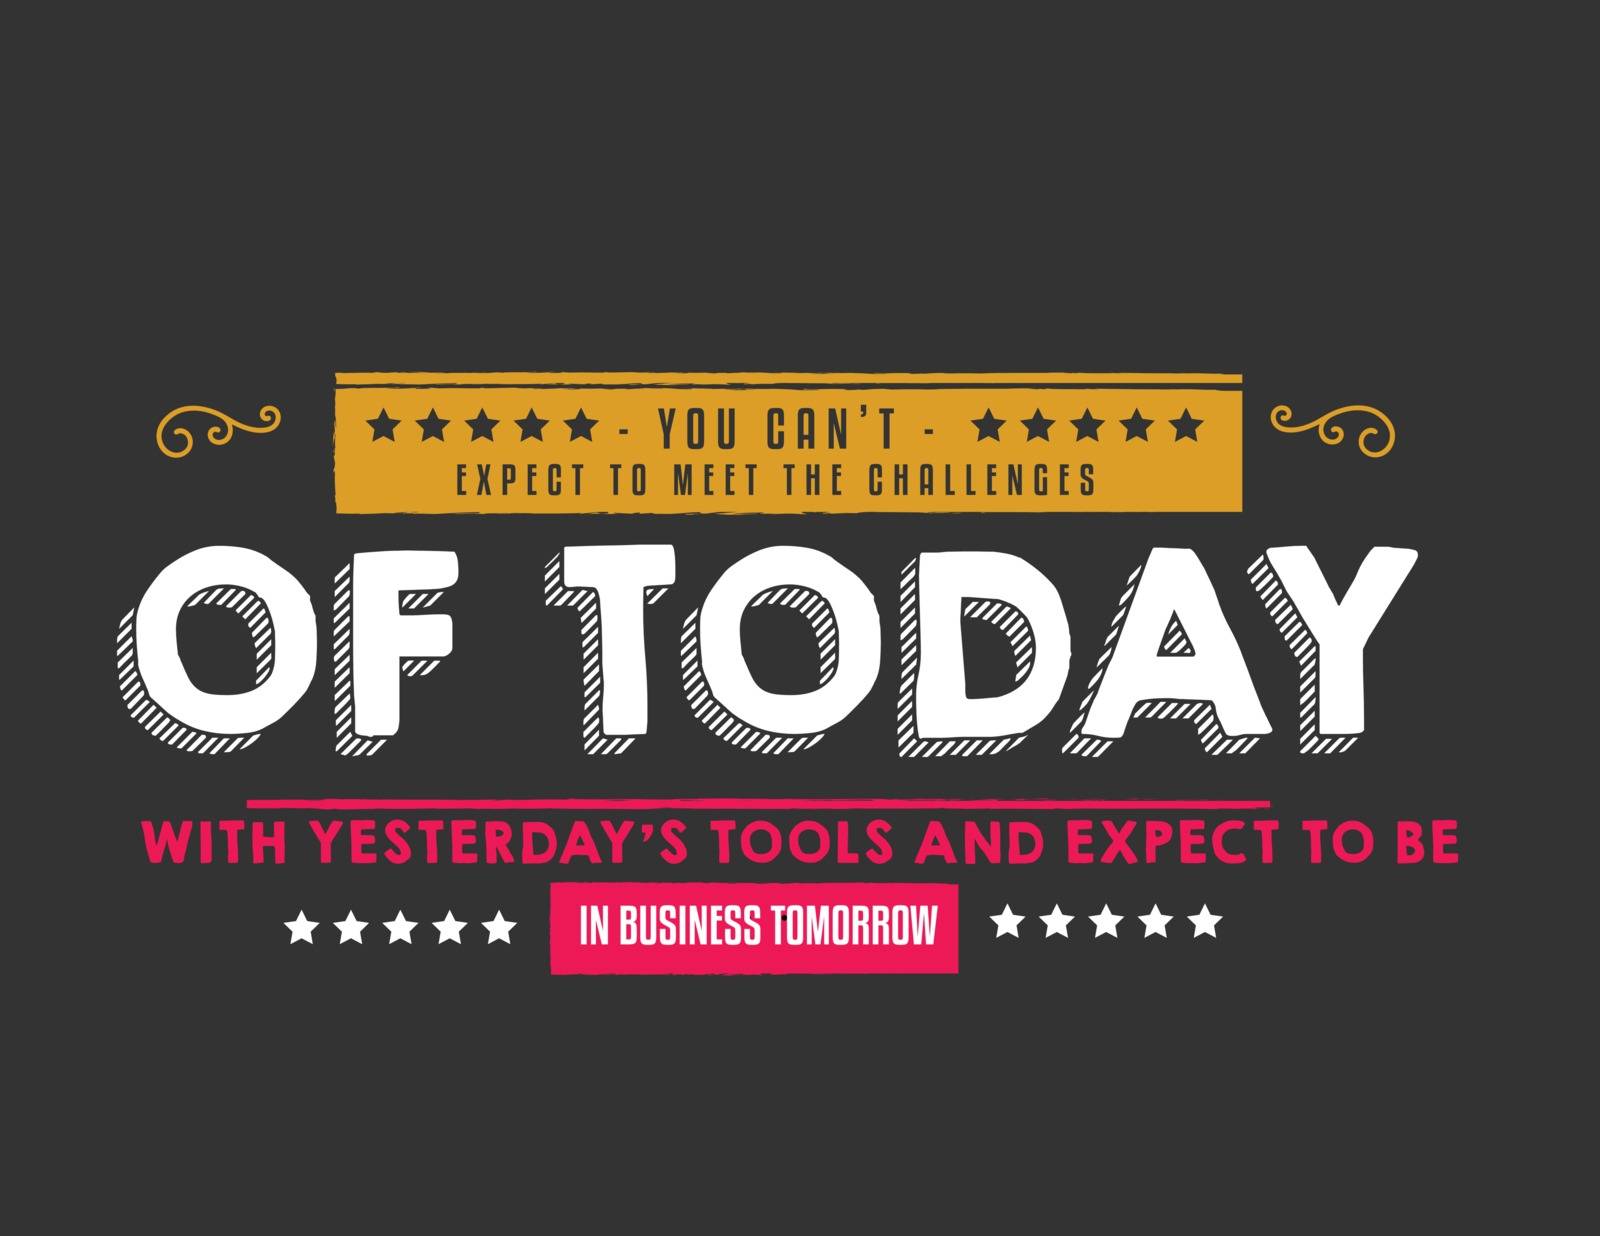 You can't expect to meet the challenges of today with yesterday's tools and expect to be in business tomorrow